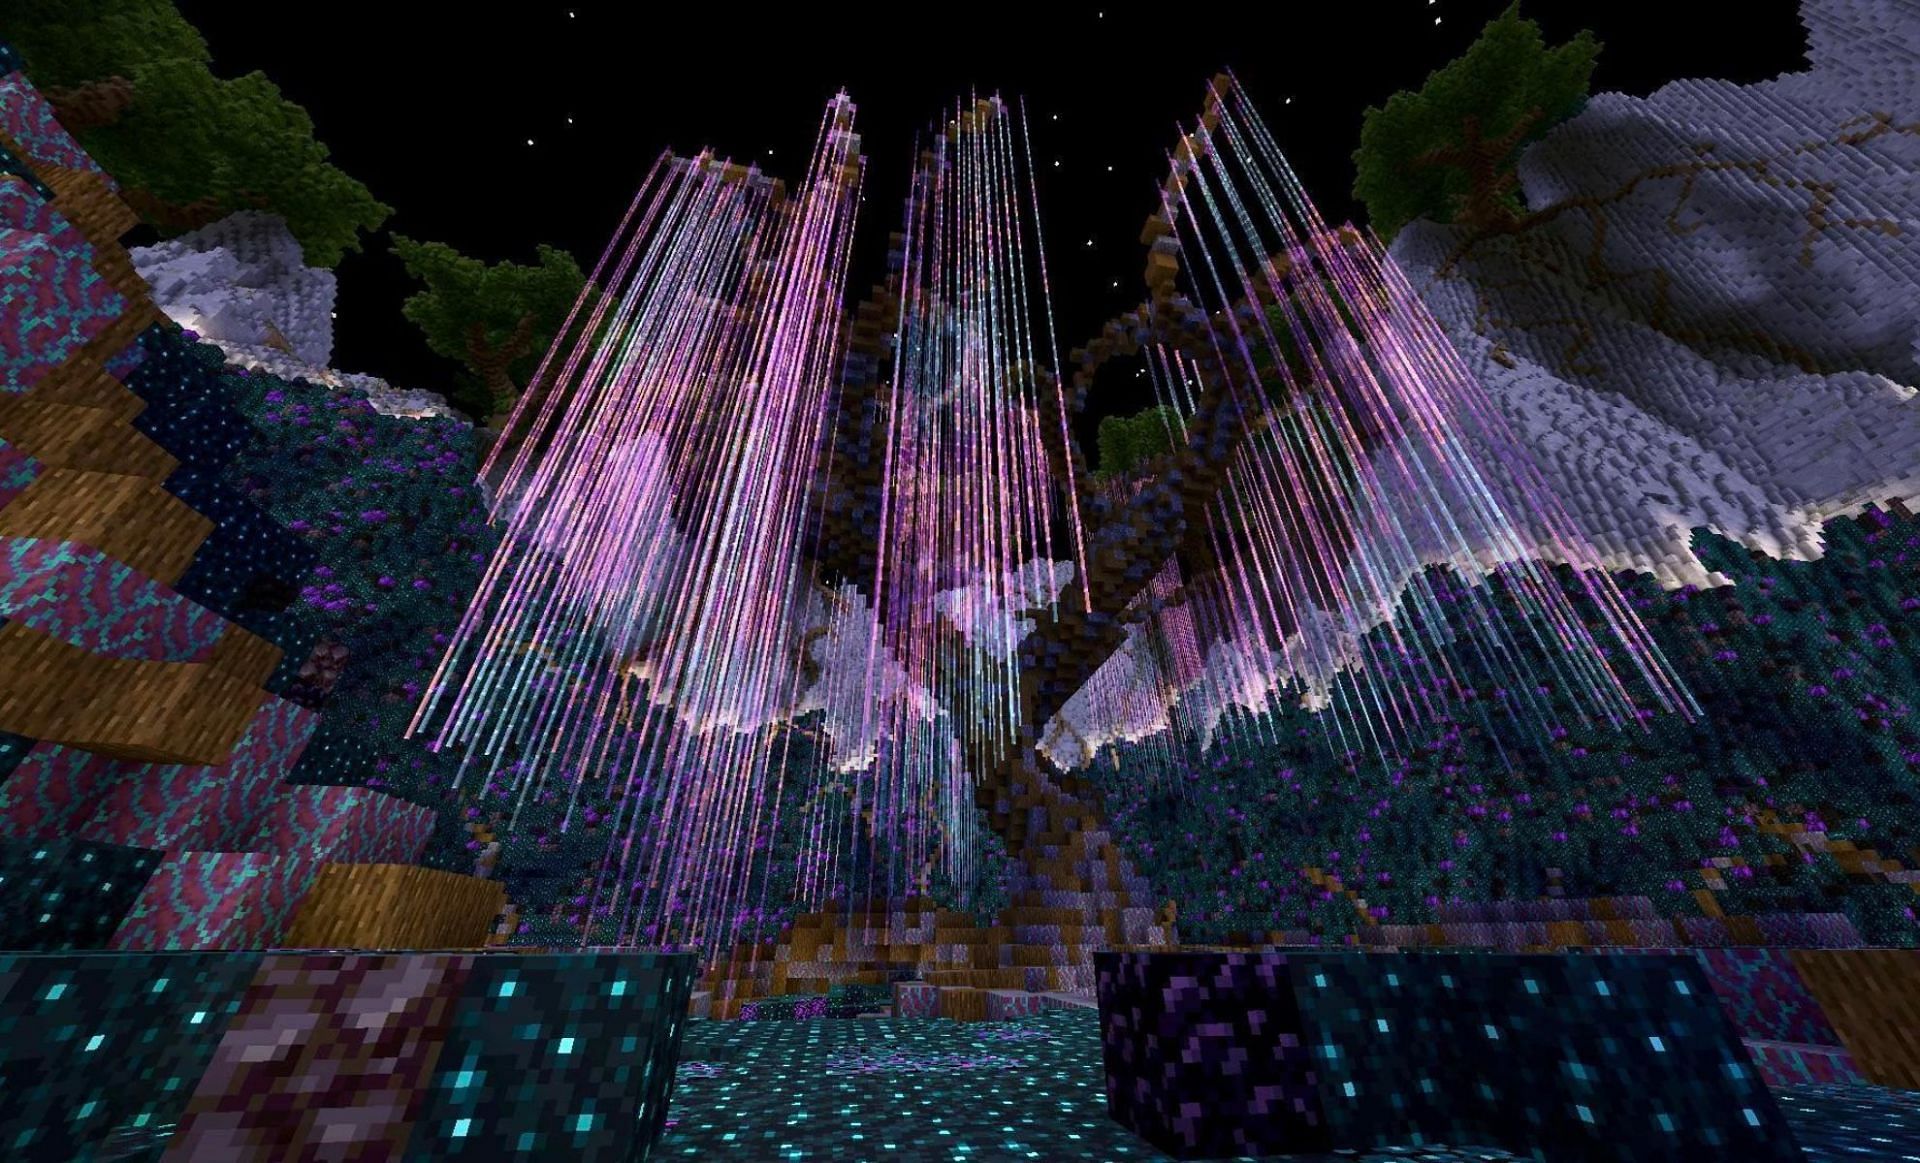 Minecraft player builds Tree of Souls from Avatar